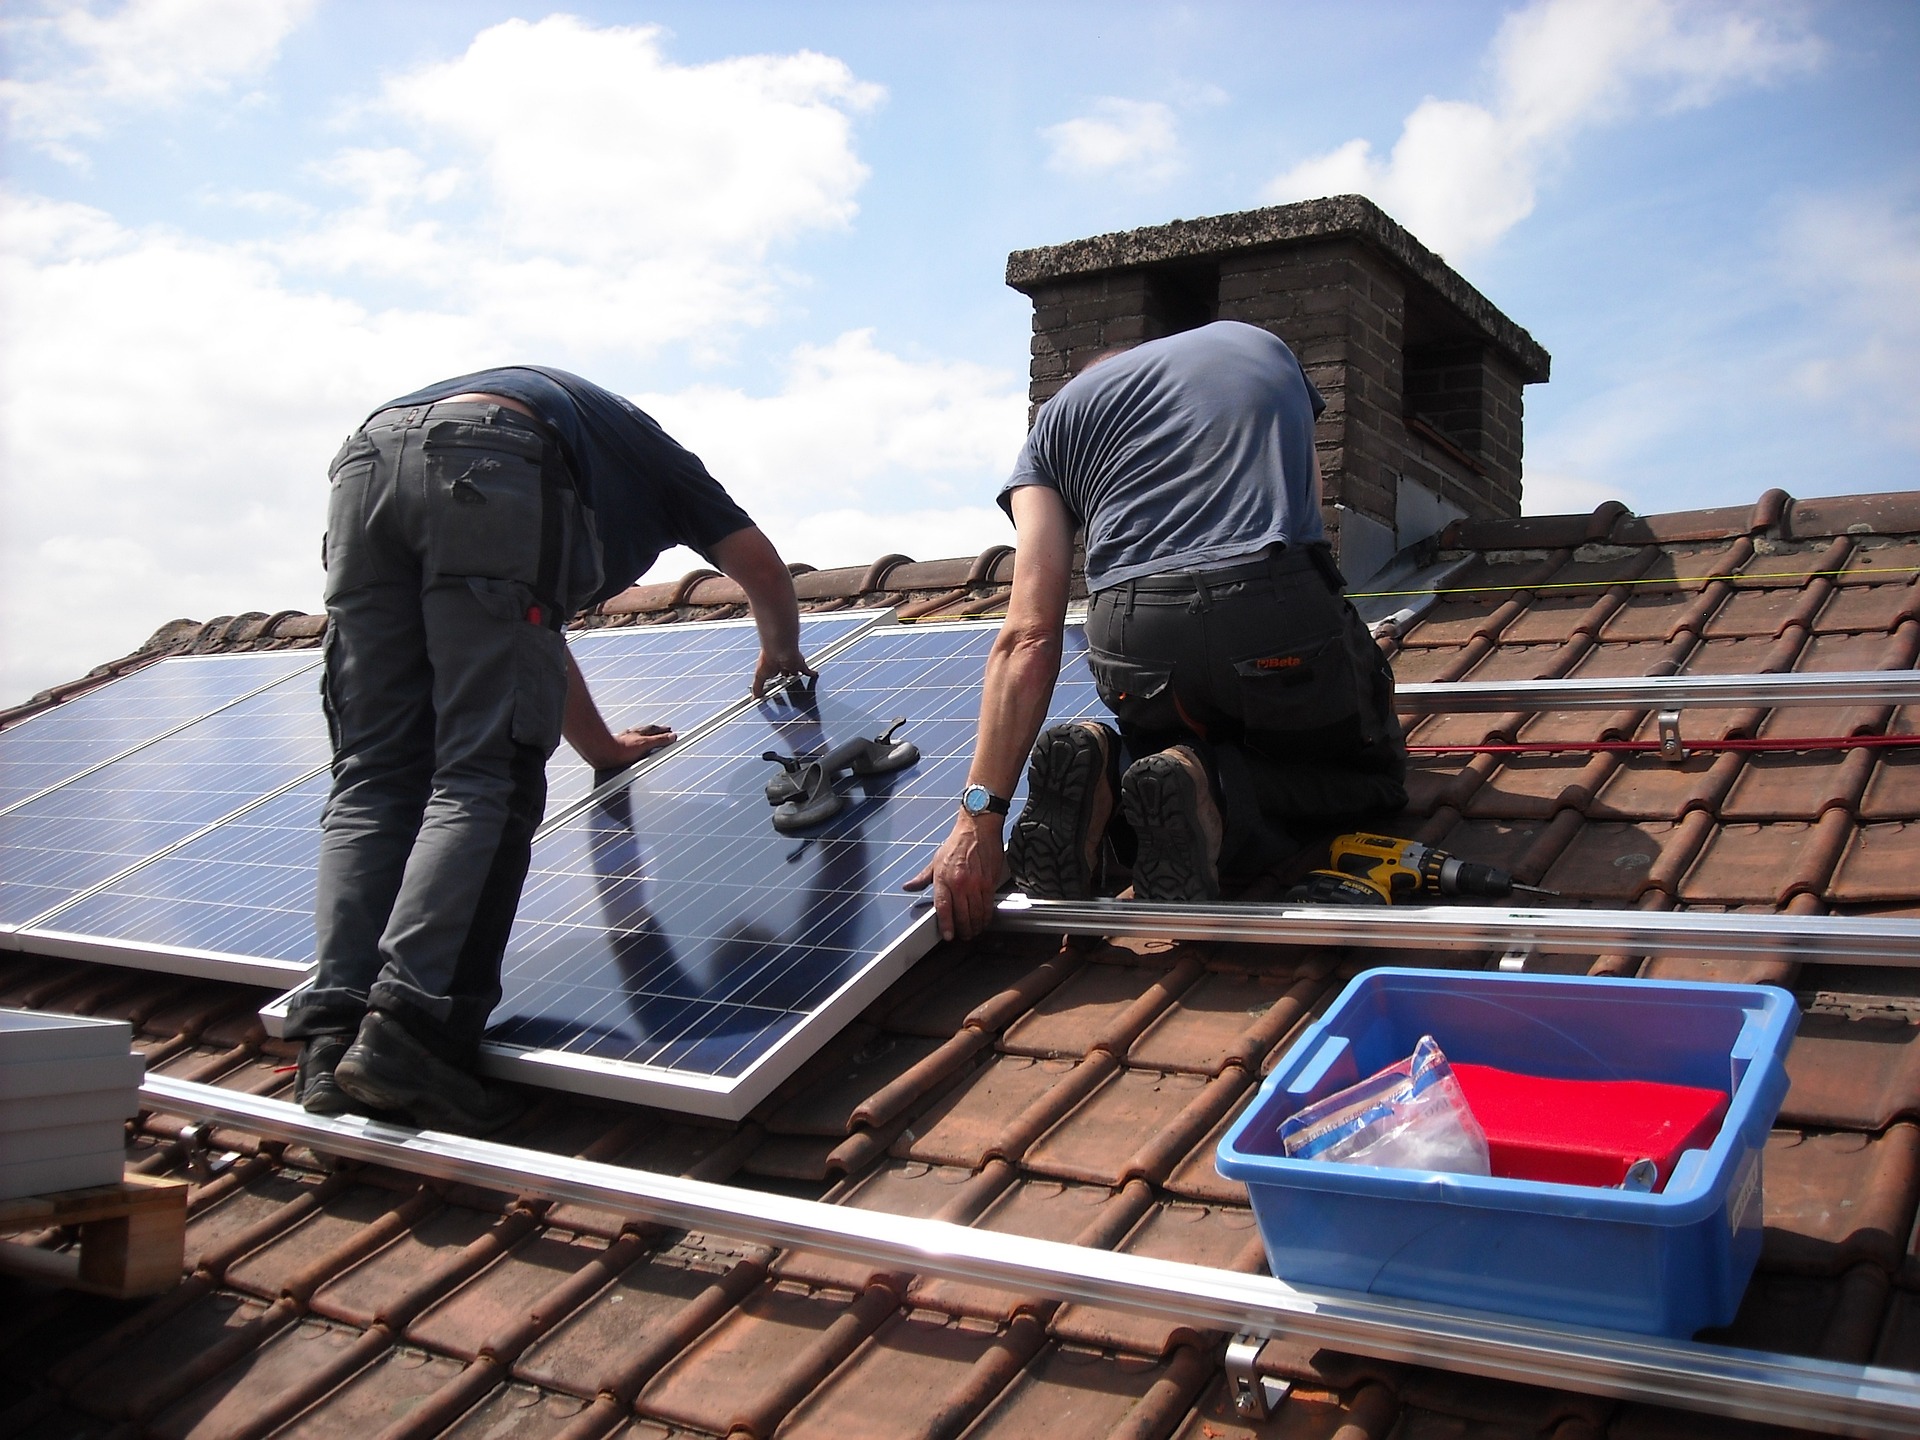 Residential Solar Energy Systems Are Growing in Popularity